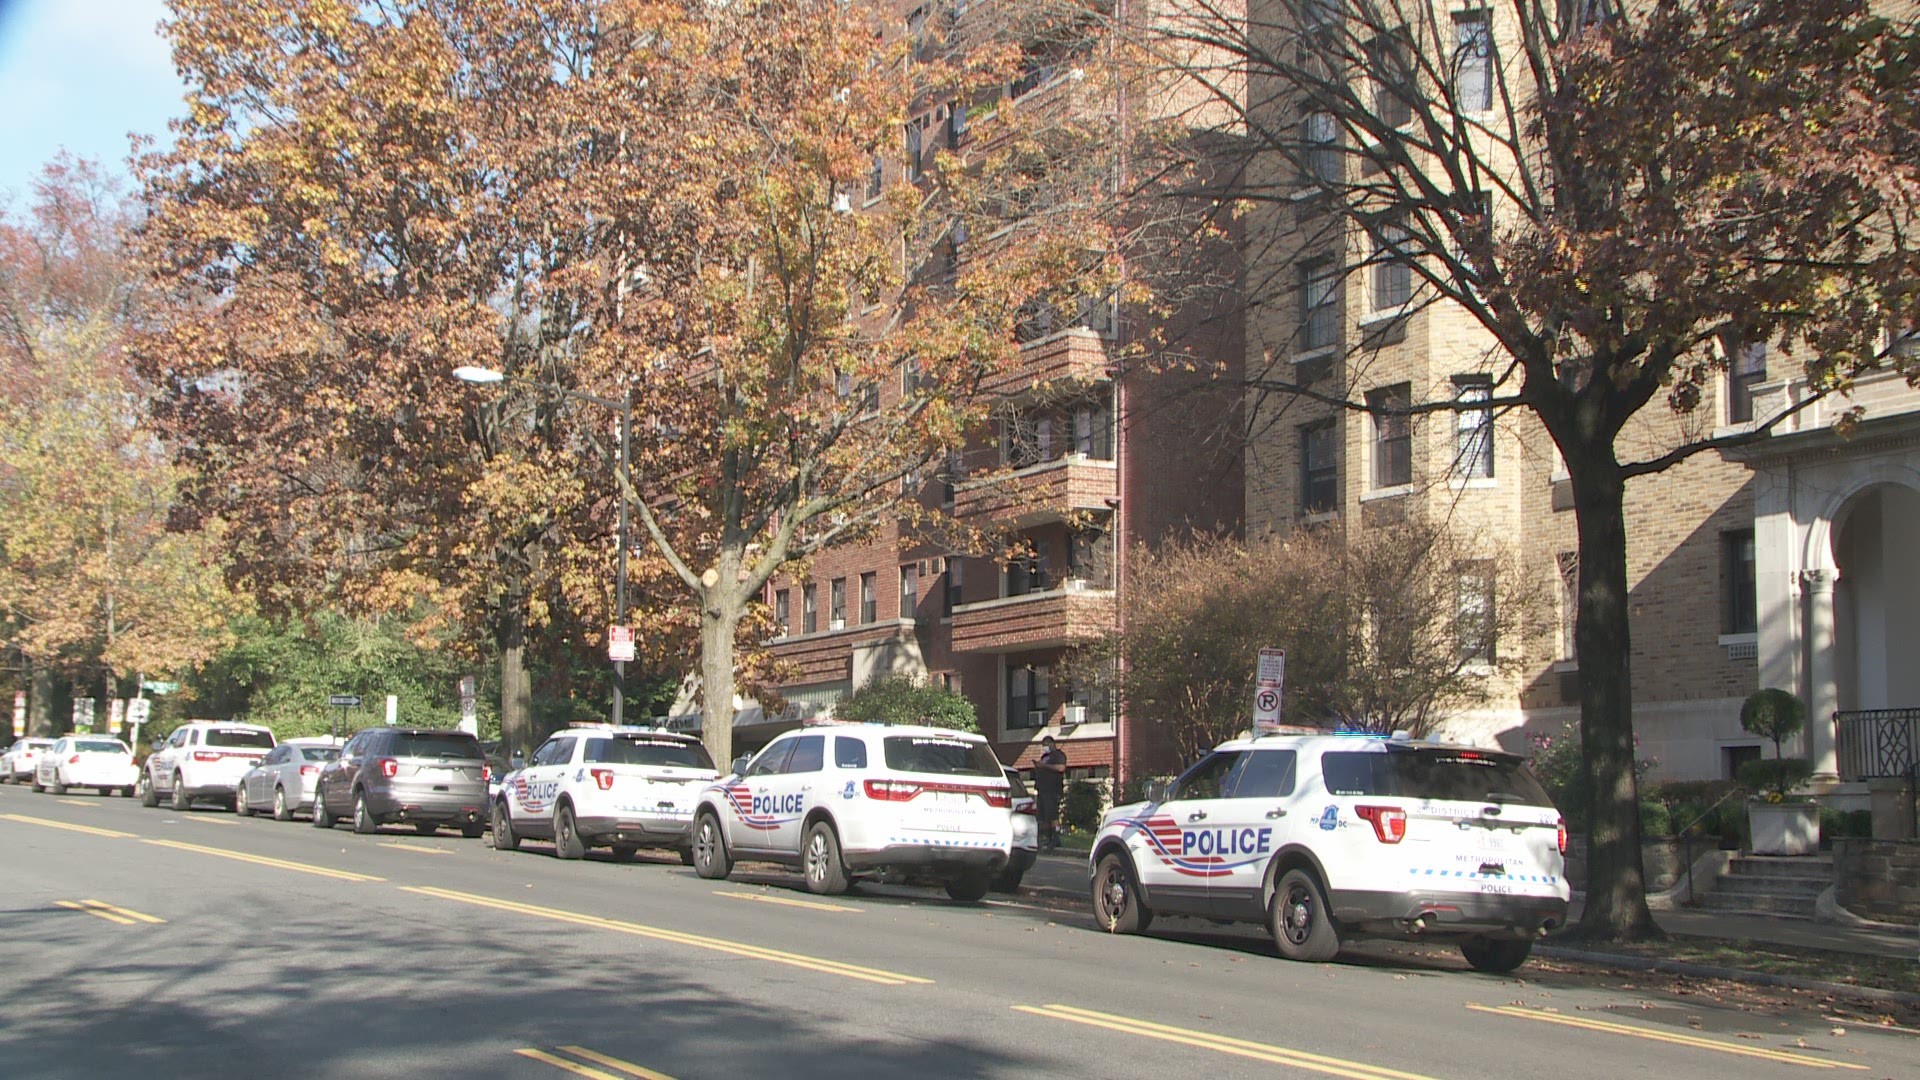 Police say two people were found shot in an apartment building in Northwest DC Thursday. One victim did not survive